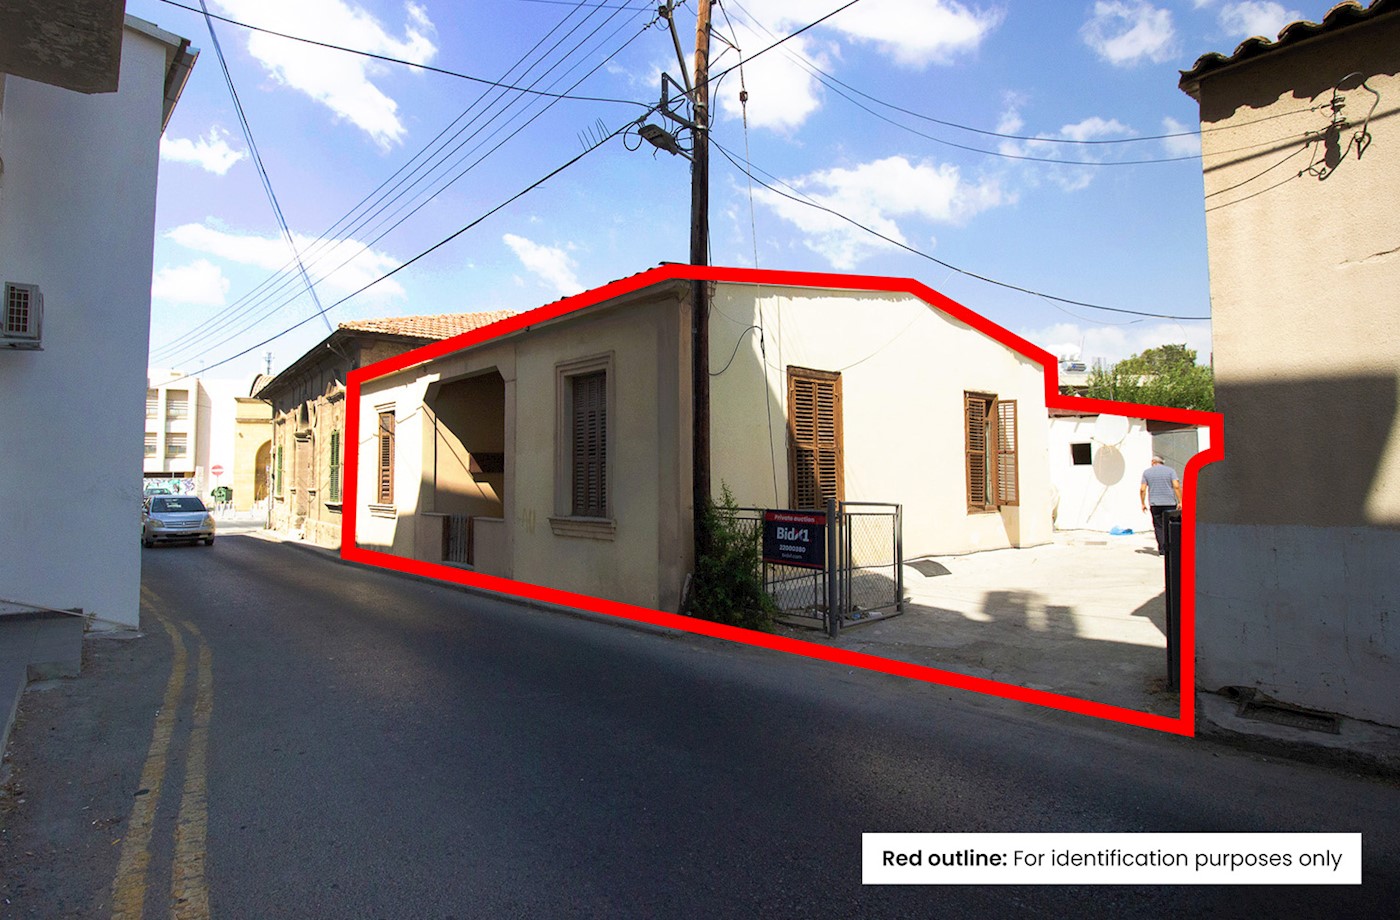 Listed Residential Building in Strovolos, Nicosia 1/15